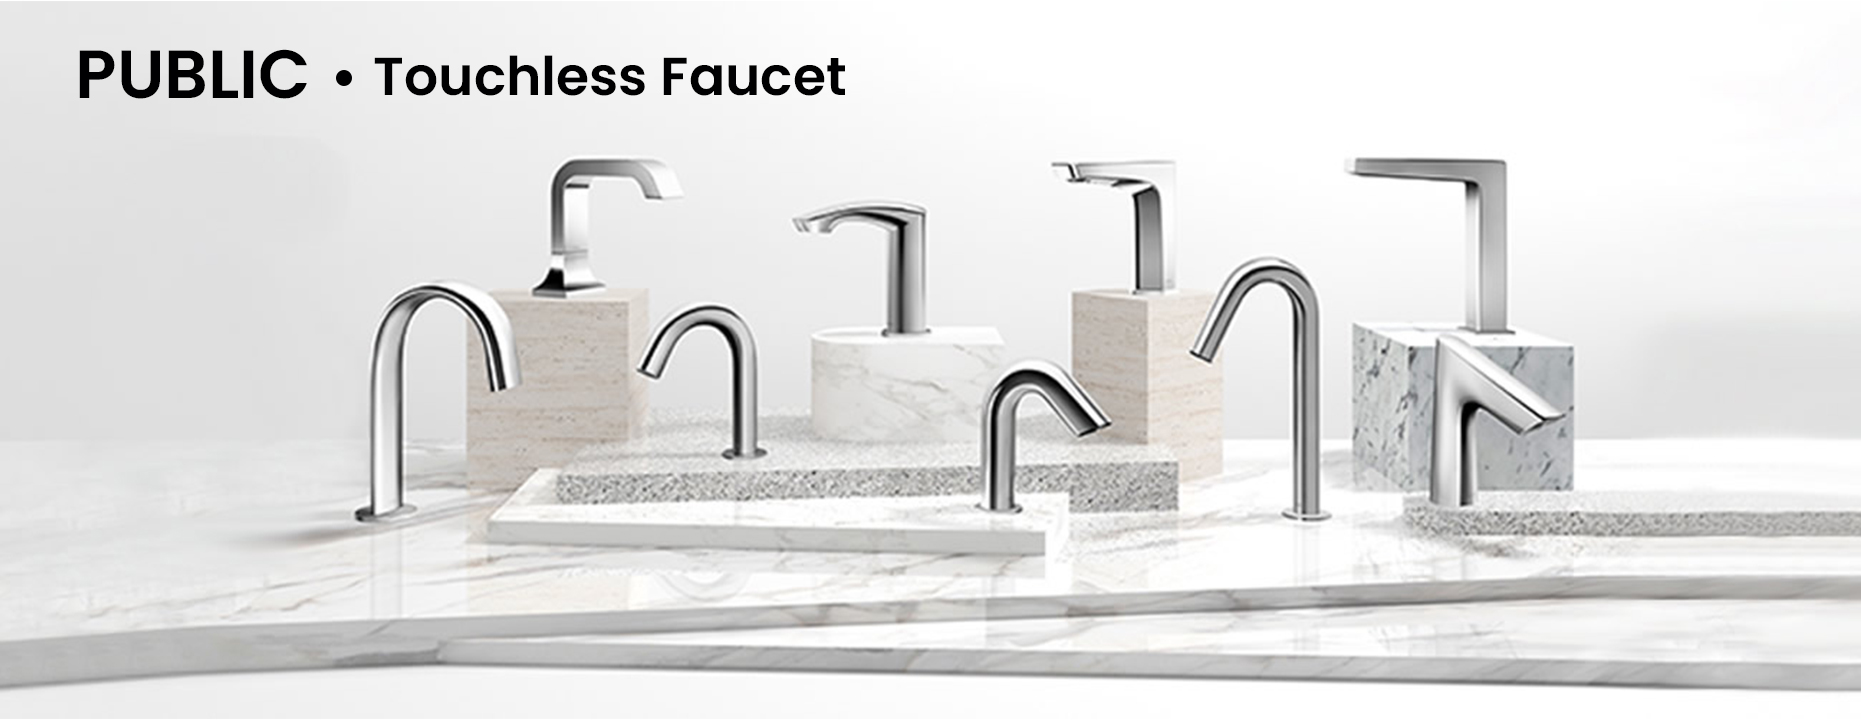 ZN Series TOUCHLESS Faucet